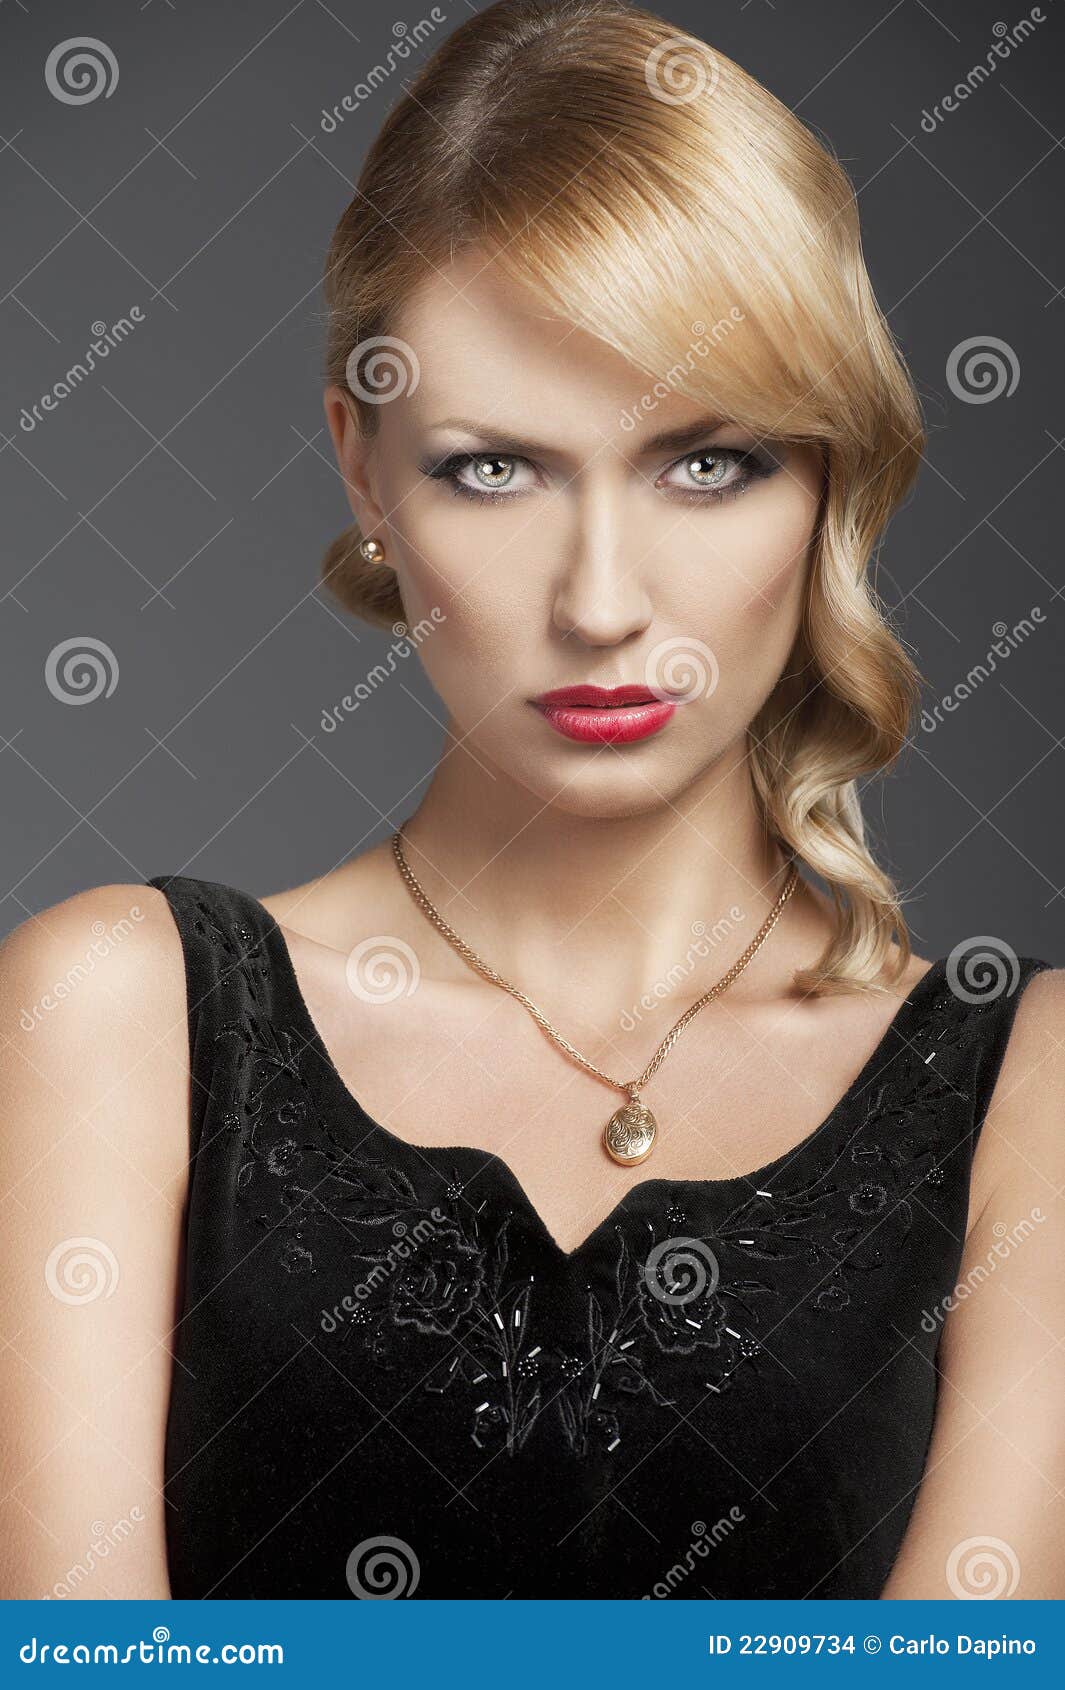 old fashion blond girl, in front of the camera